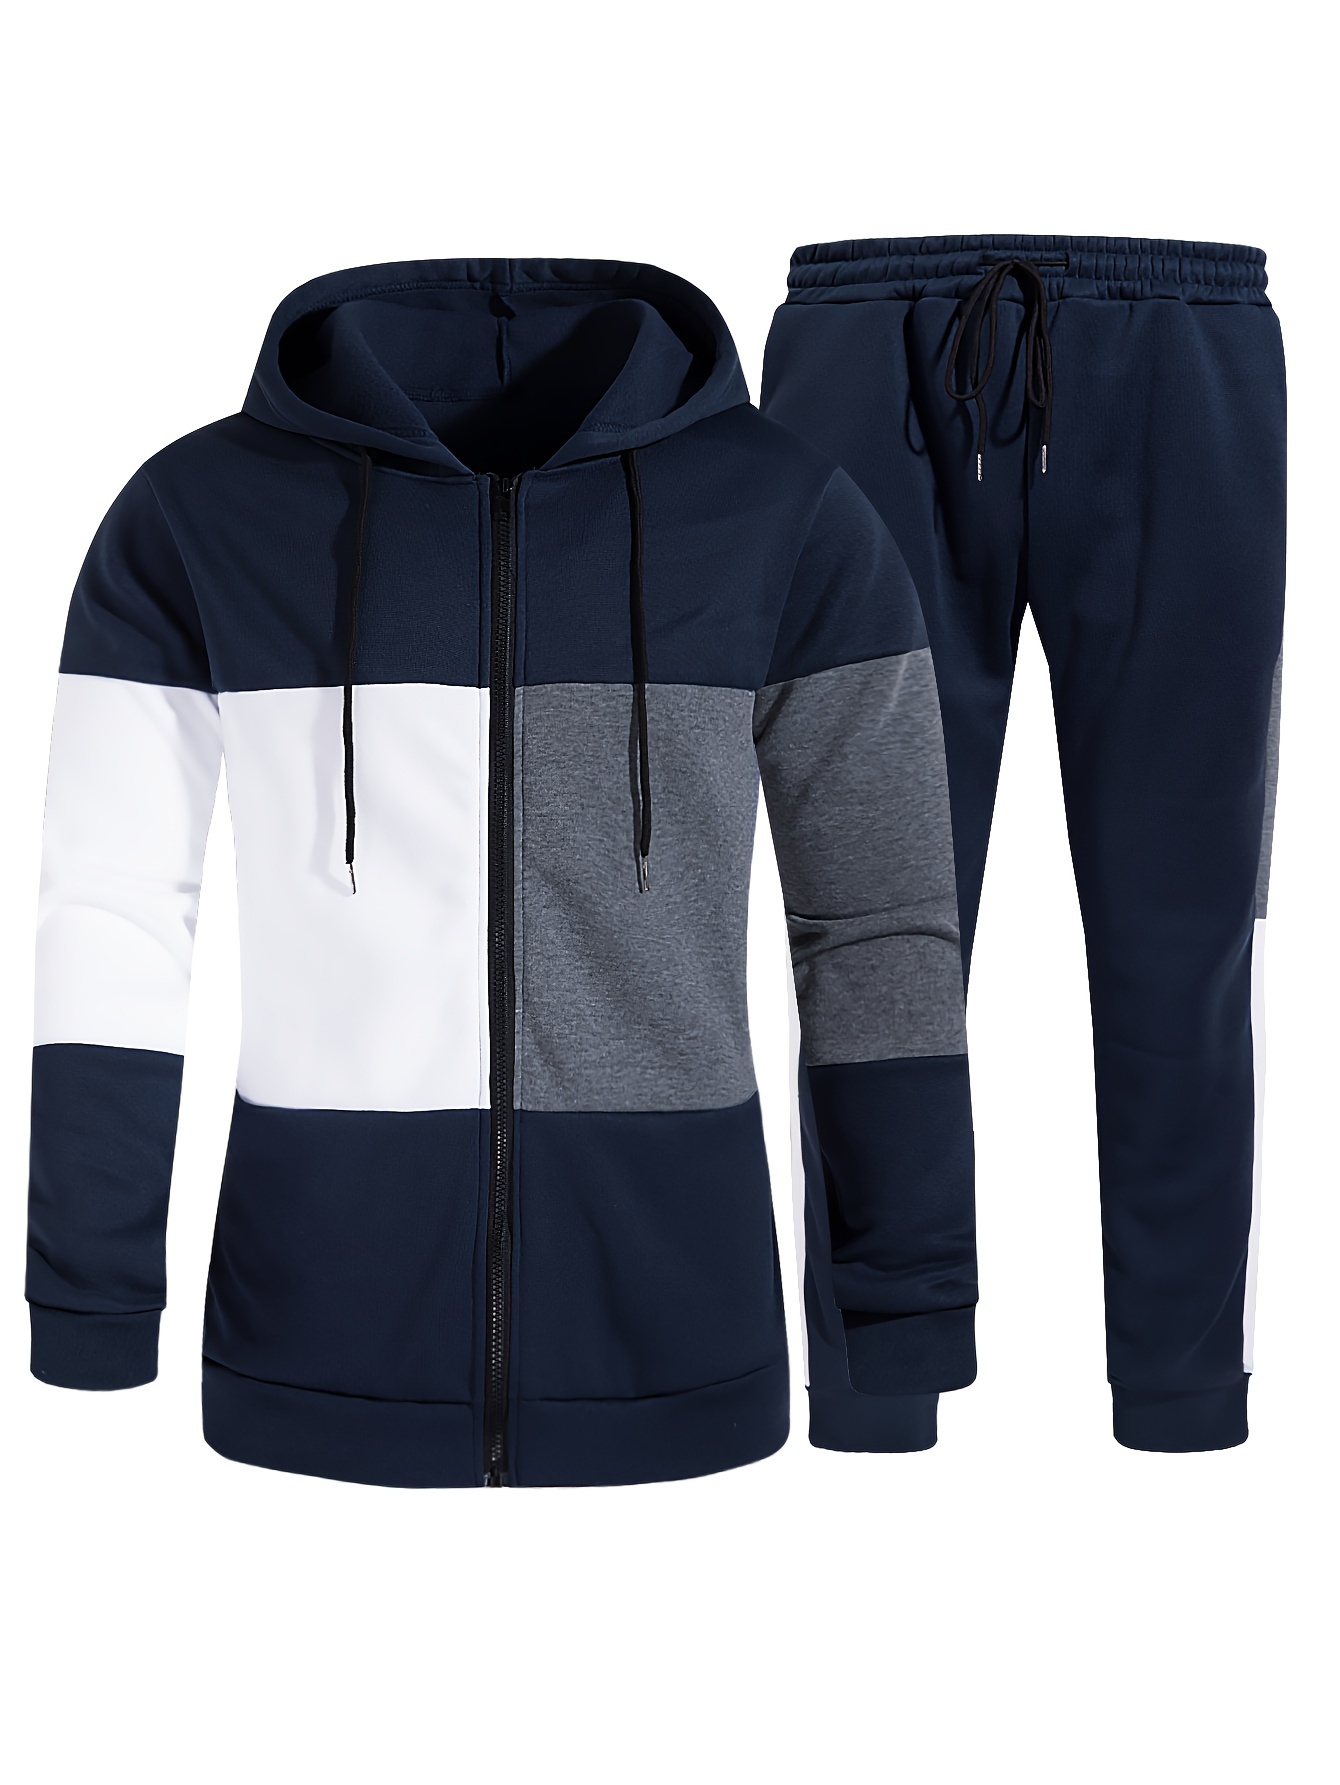 Mens Full Zip Tracksuits 2 Pieces Casual Sport Sets Long Sleeve Jacket and  Sweatpants Suits Block Color Jogging Sweatsuits